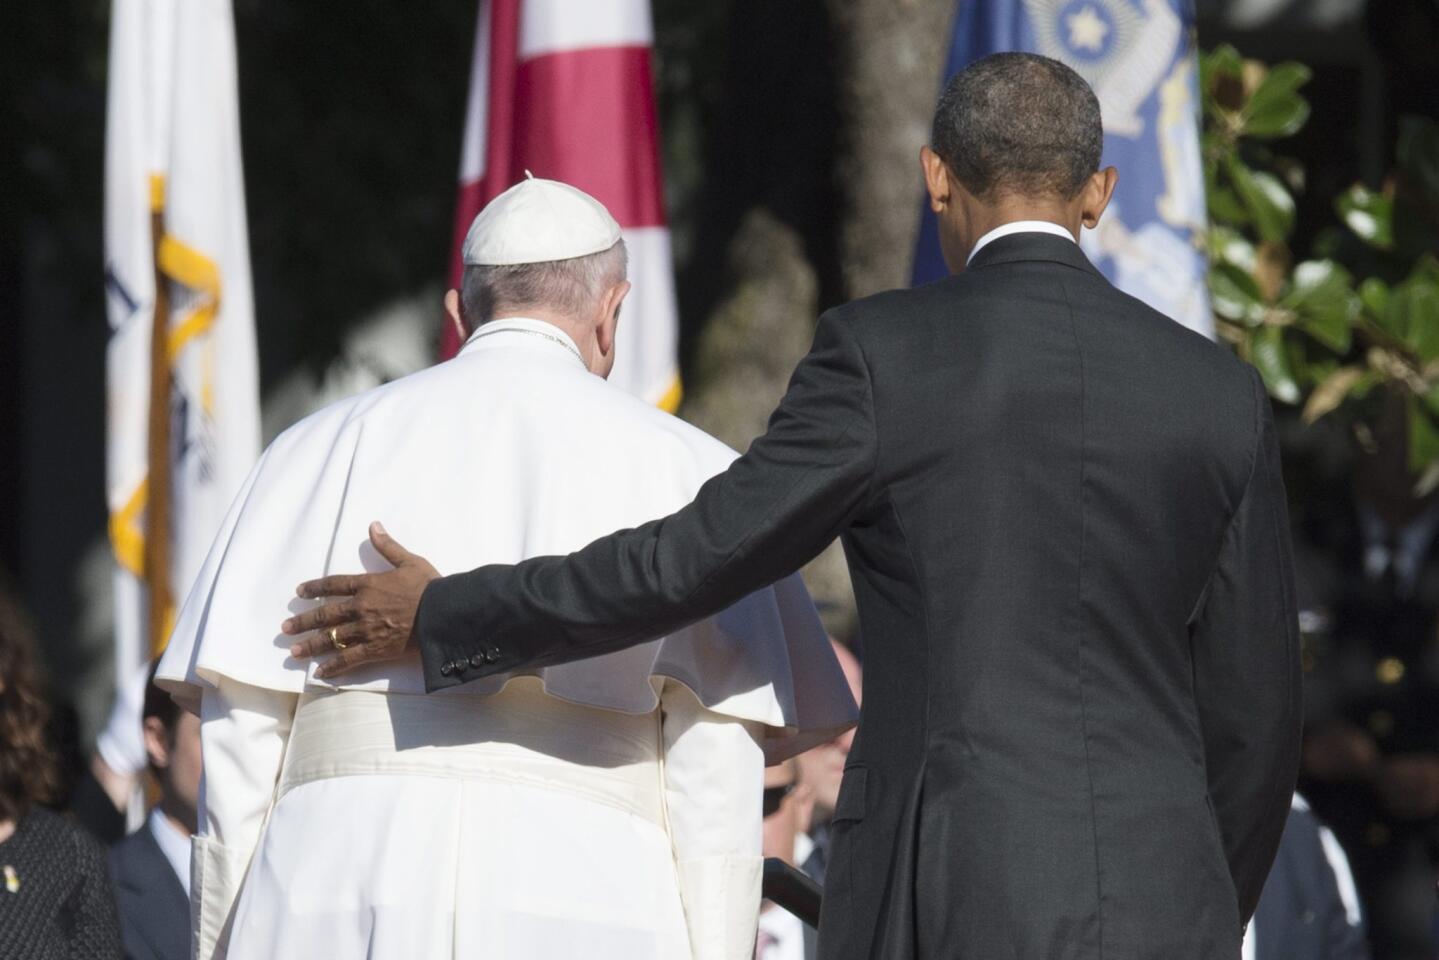 Pope Francis attends an arrival ceremony with President Barack Obama on the South Lawn of the White House on Sept. 23, 2015.